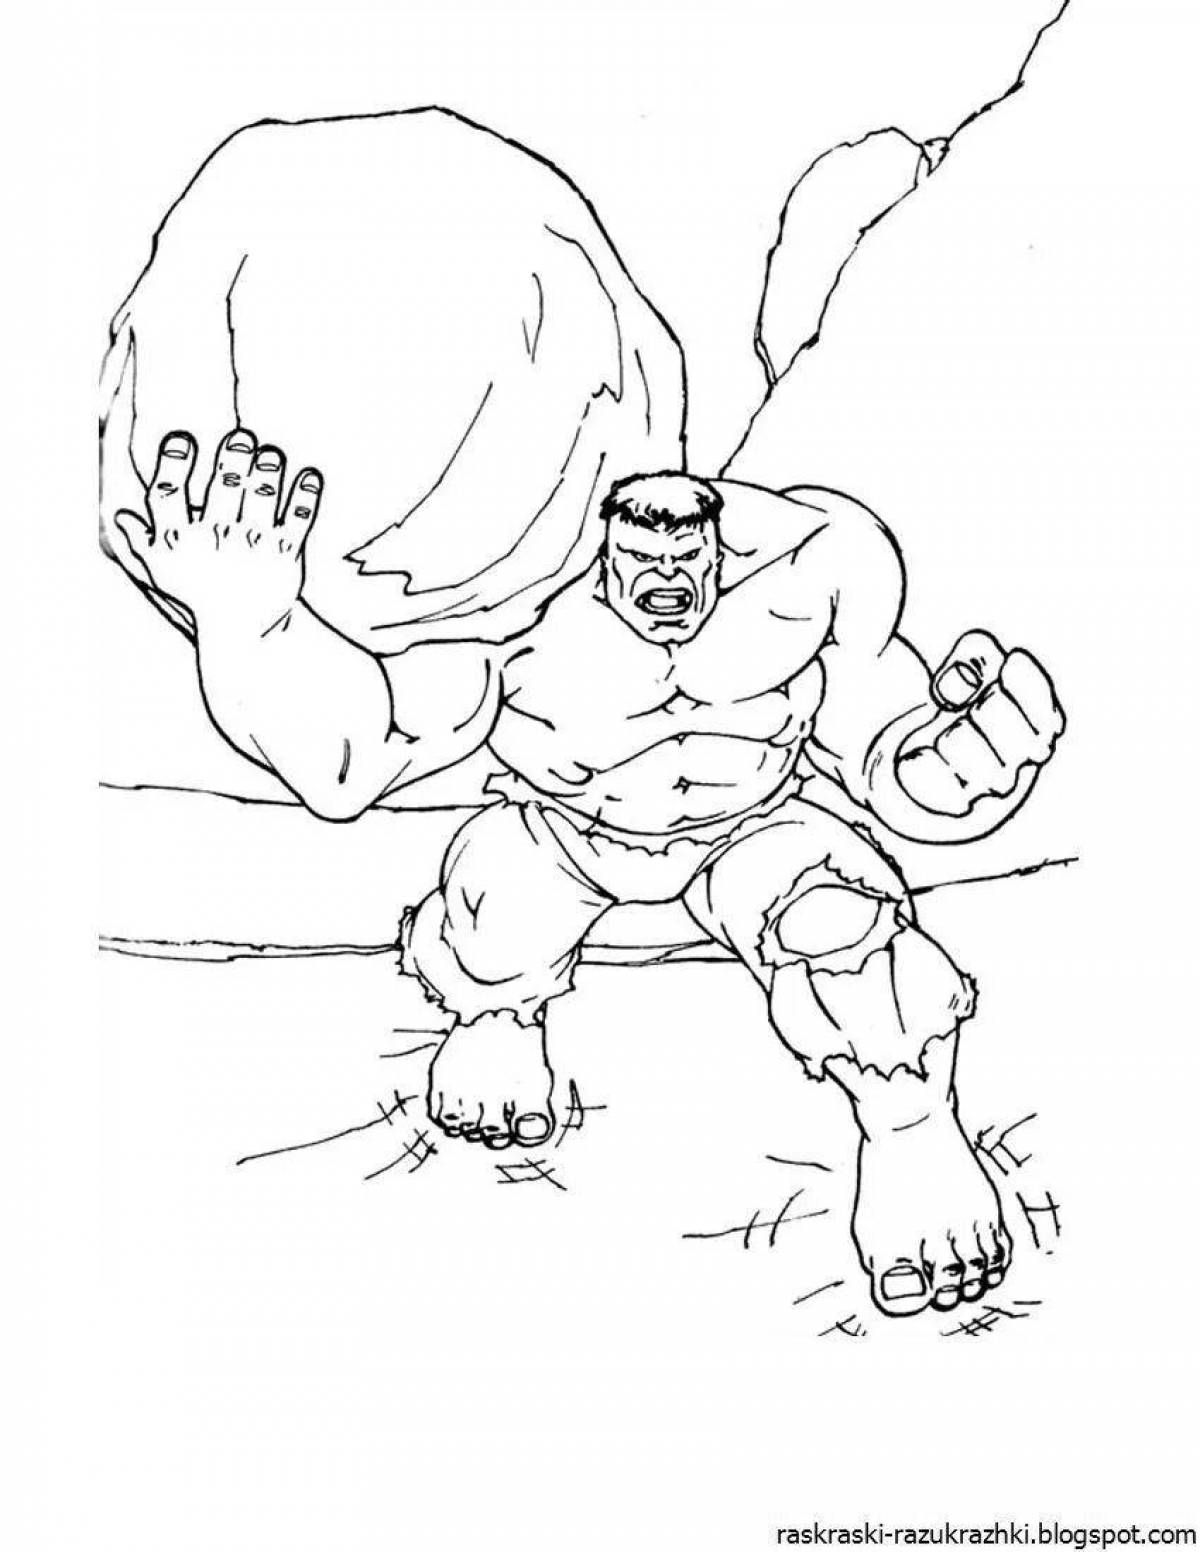 Amazing Hulk coloring book for kids